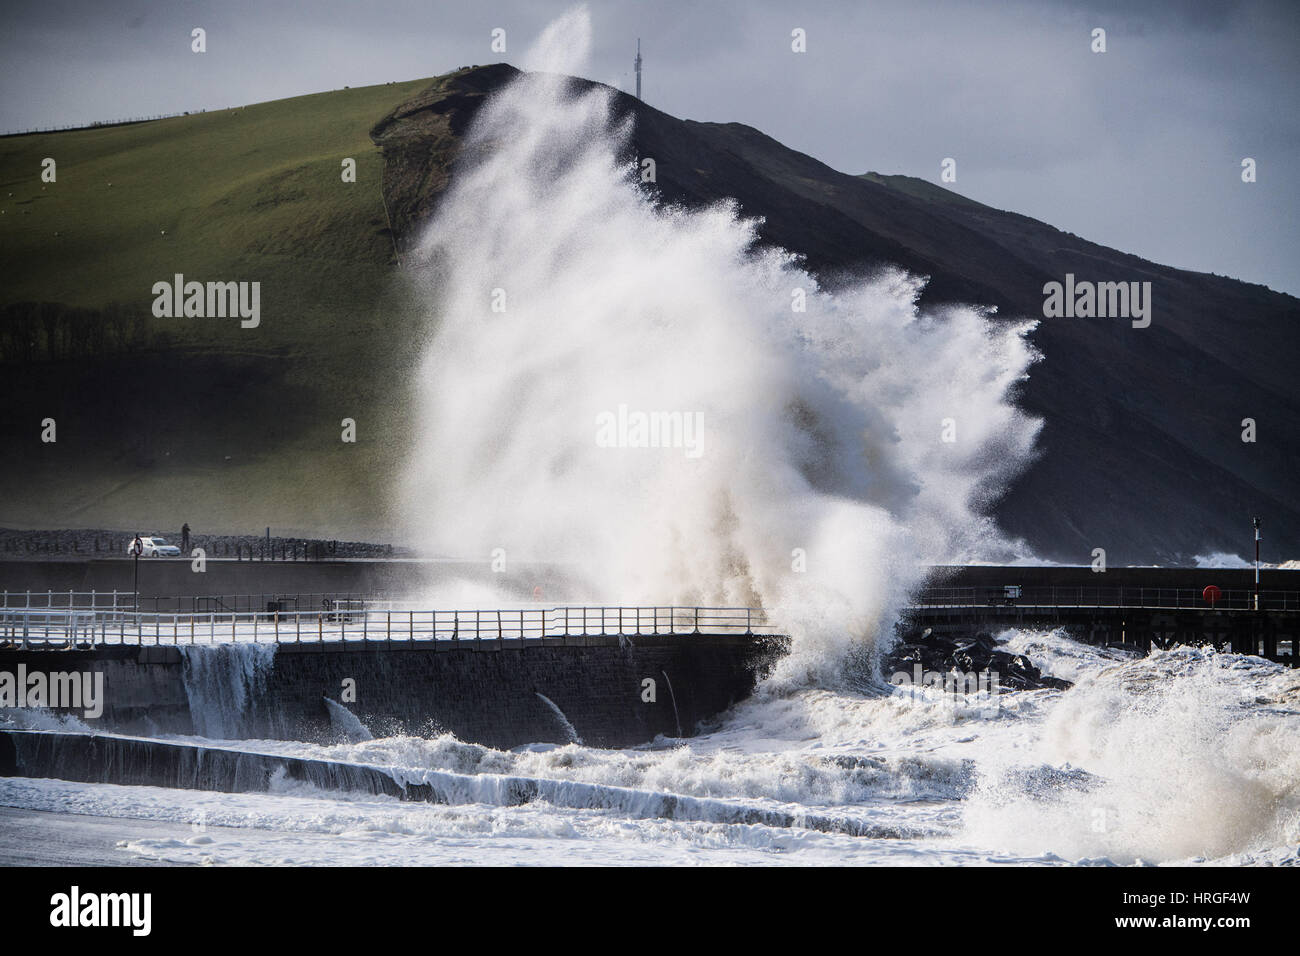 Aberystwyth, Wales, UK. 2nd March 2017.  UK Weather: After a night of gale force winds, thunderstorms and hailstones,  the morning’s 5.4m high spring tide bring mountainous high waves to batter the promenade and sea defences in Aberystwyth  on the Cardigan Bay coast of West Wales    Credit: keith morris/Alamy Live News Stock Photo